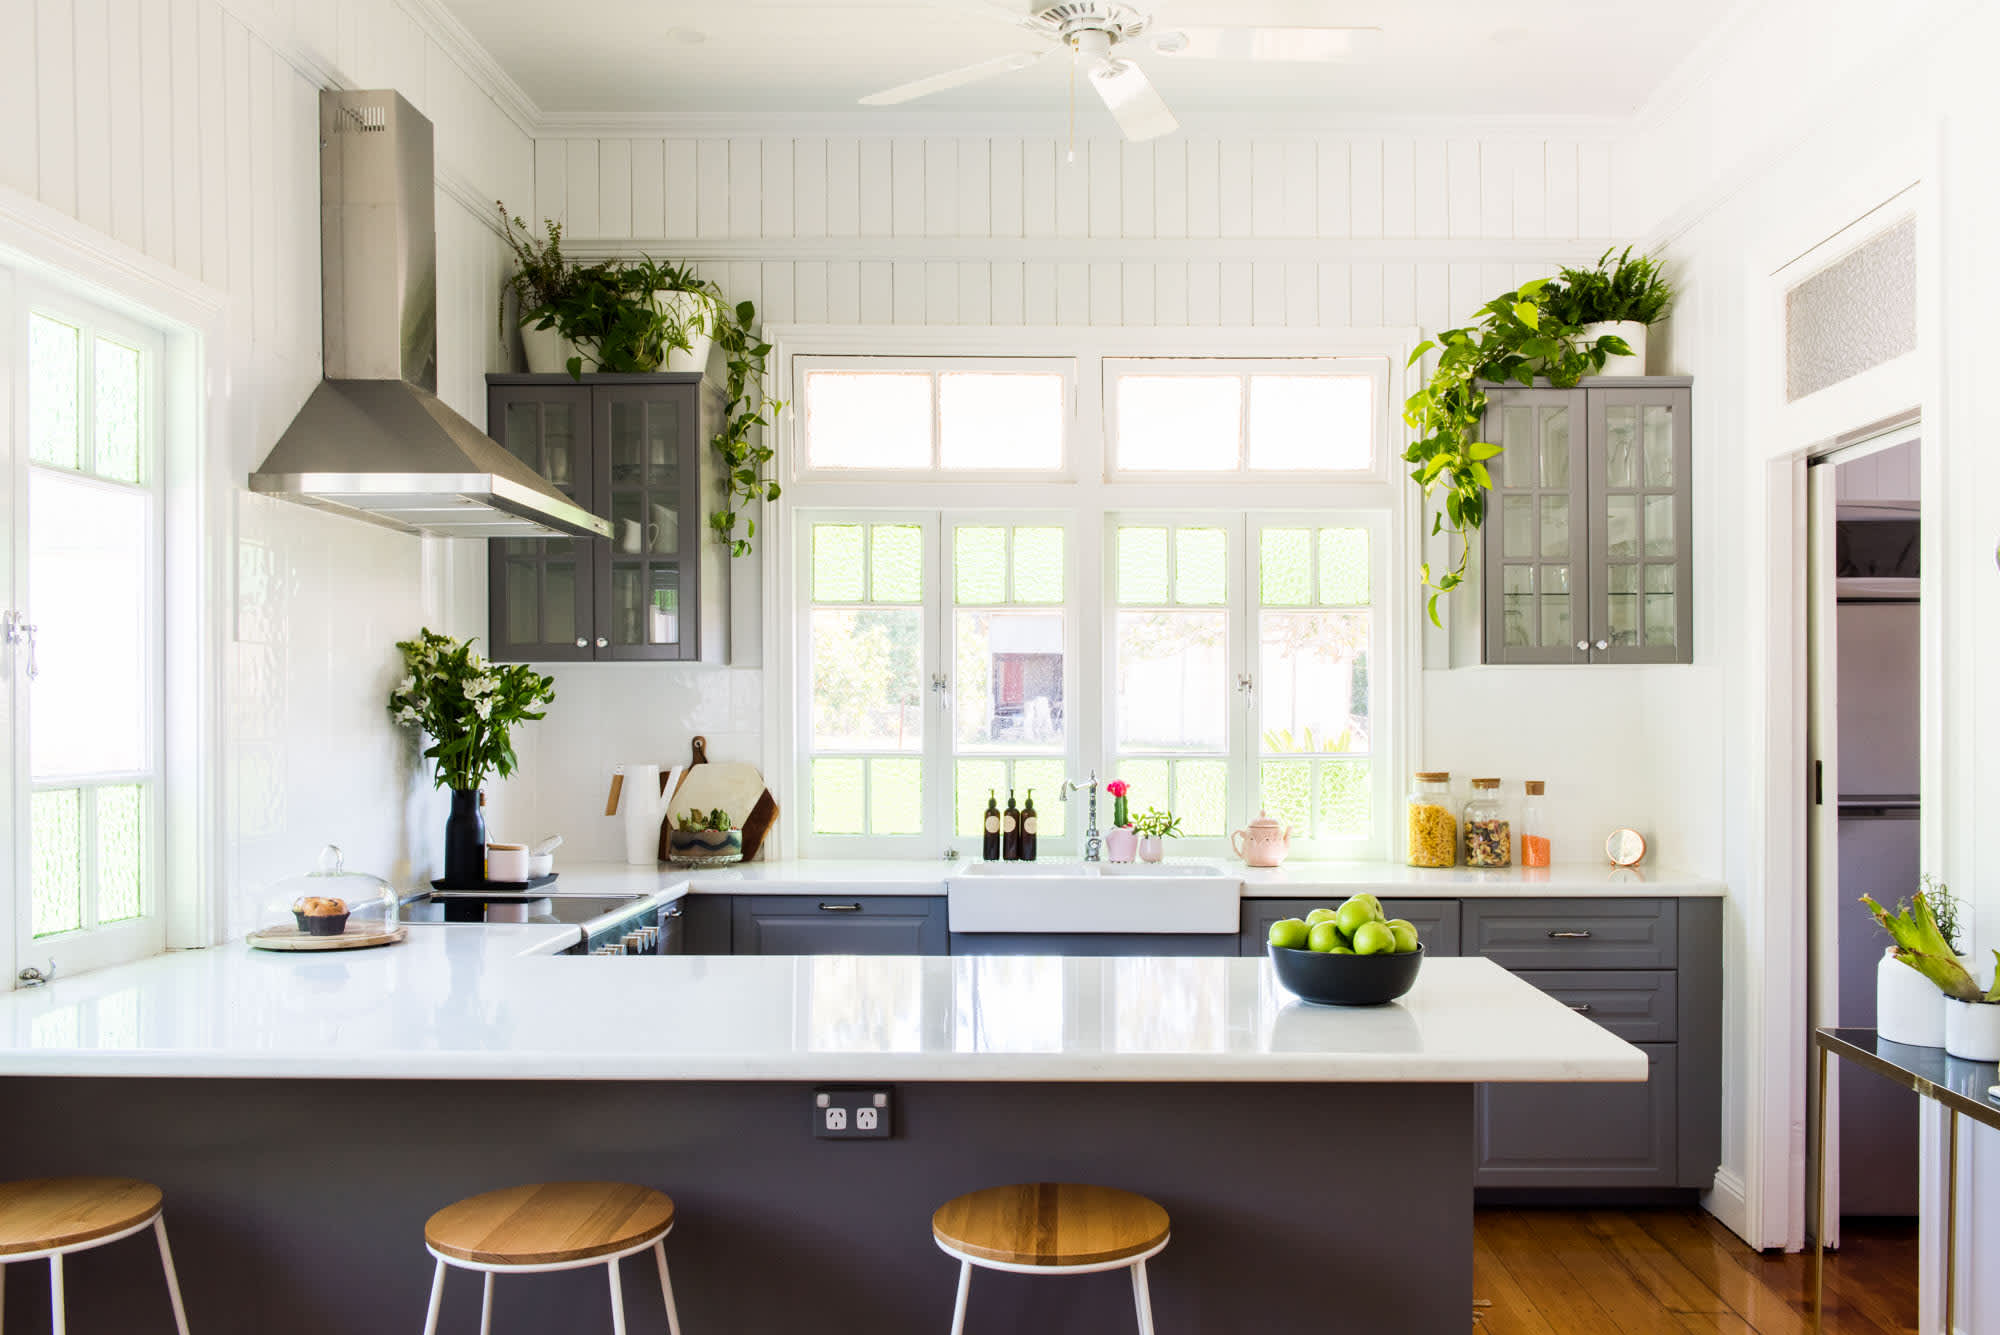 18 Gorgeous Gray Kitchen Ideas   How to Use Gray in Kitchens ...